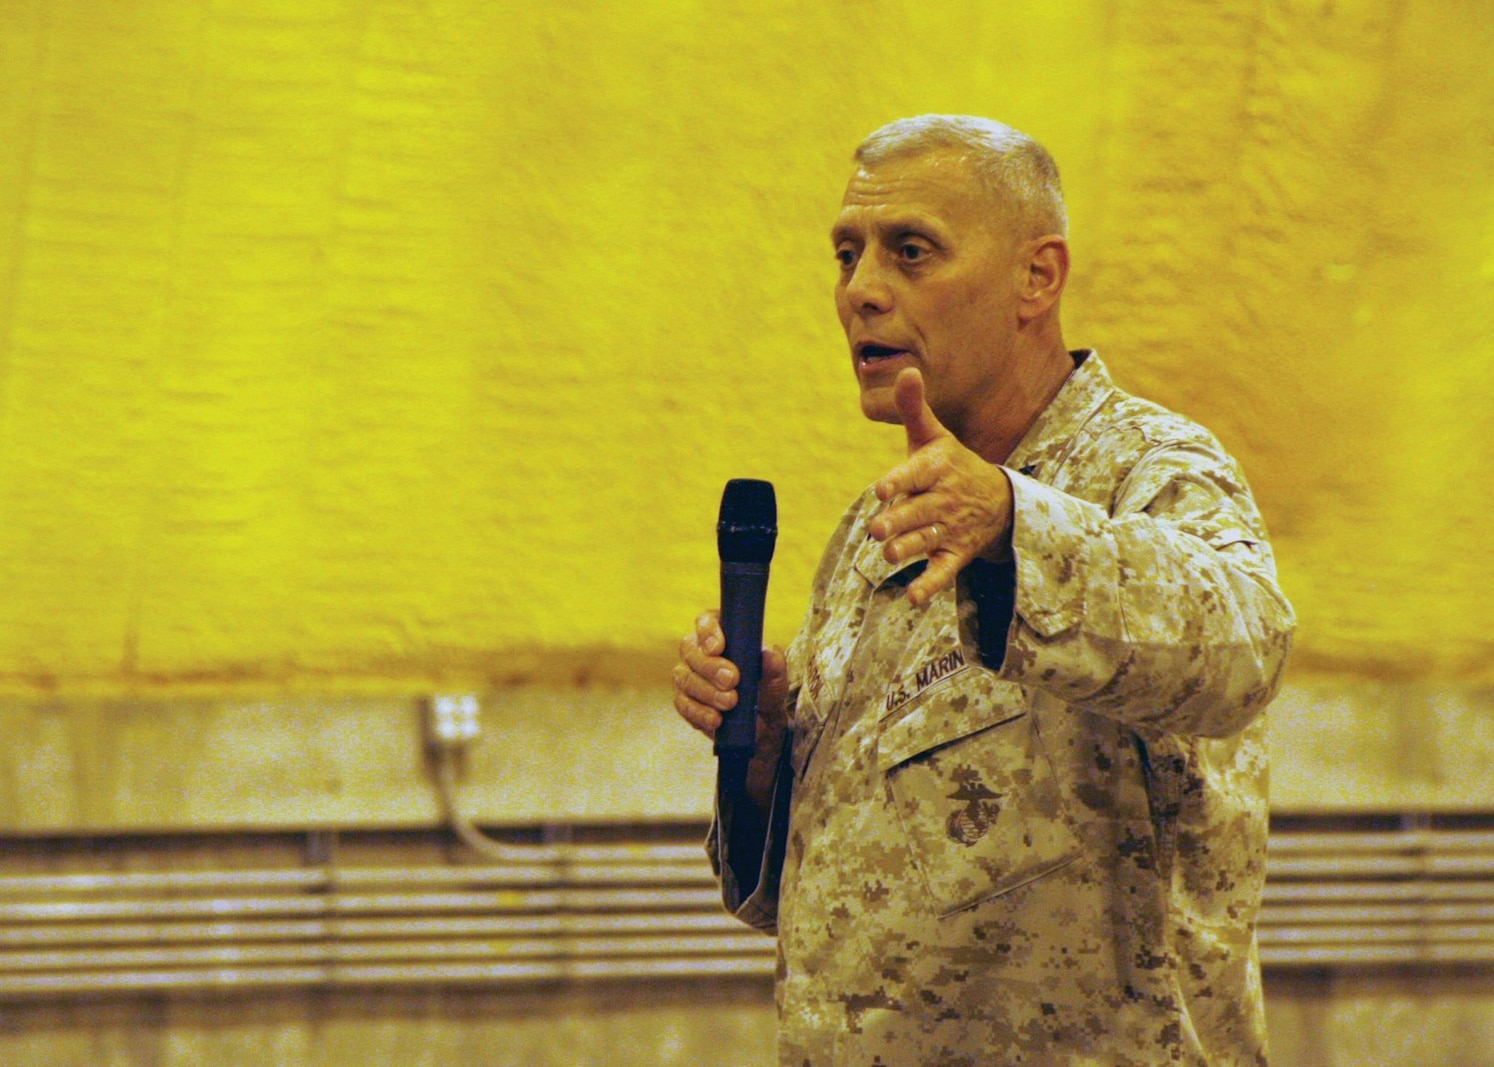 Assistant Commandant of the Marine Corps Gen. John M. Paxton Jr. speaks to Marines and sailors during a town hall meeting aboard Camp Leatherneck, Helmand province, Afghanistan, July 18, 2014. During the meeting, Gen. Paxton discussed the restructuring of the Corps, how Marines will reset into peacetime as a crisis response force, as well as the integration of women into ground combat jobs.